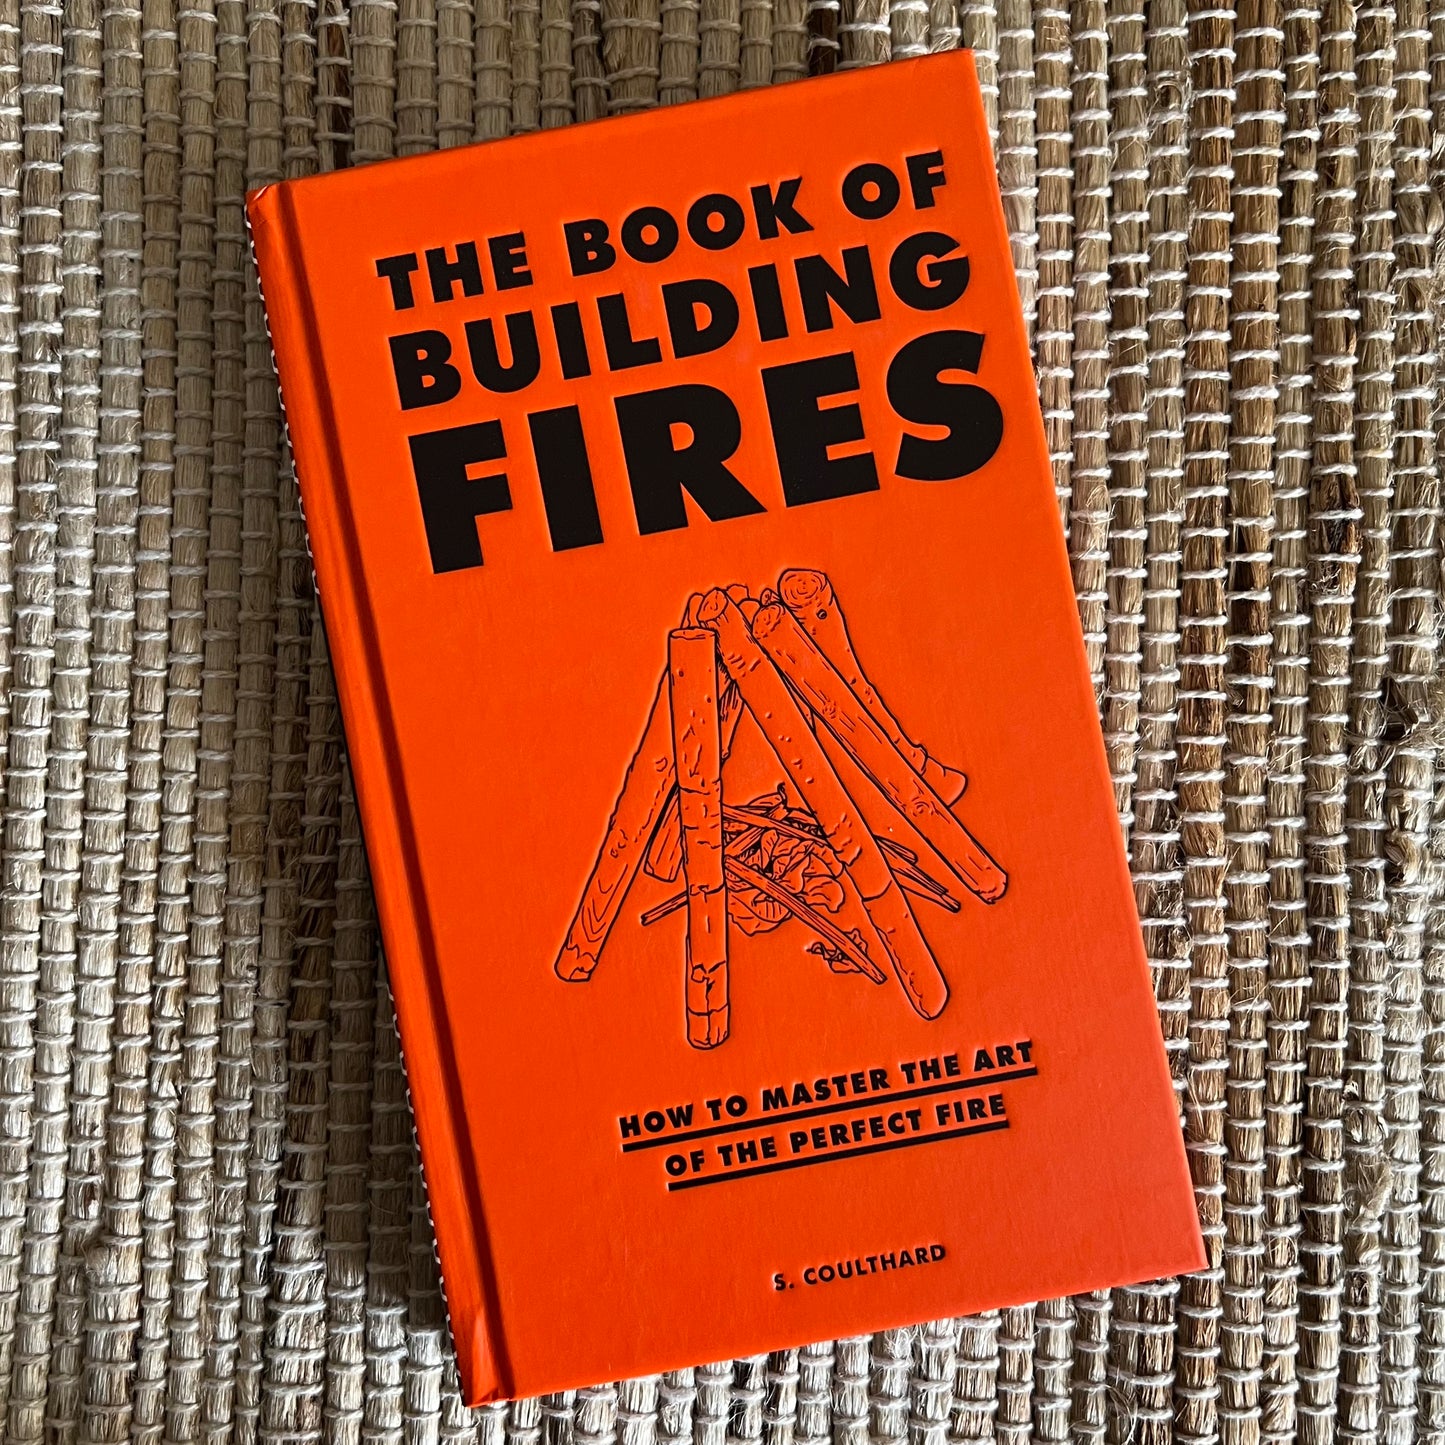 The Book of Building Fires by S. Coulthard